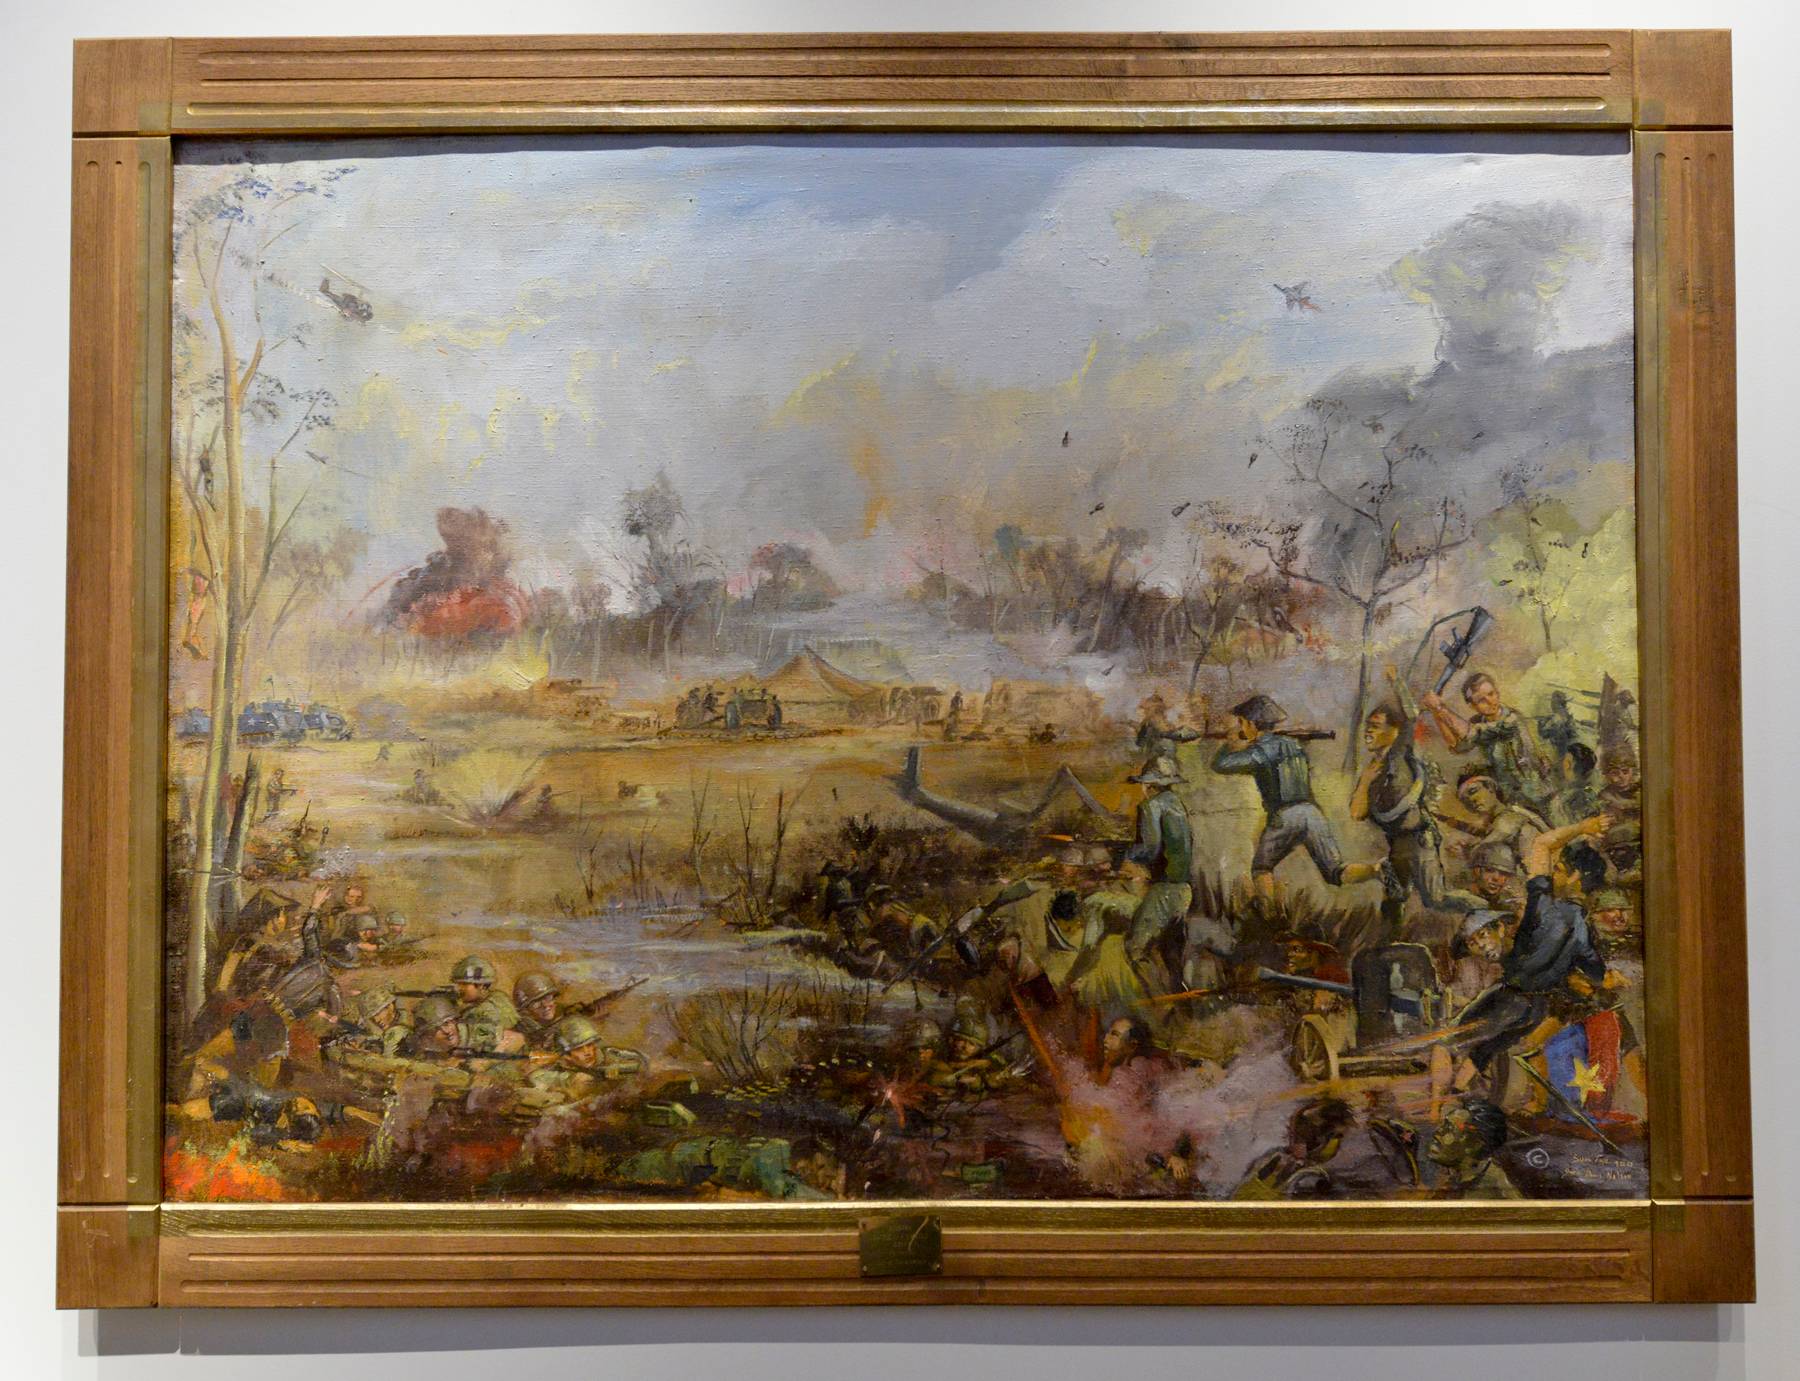 A framed painting depicting a battle between U.S. and National Liberation Front or Viet Cong forces.